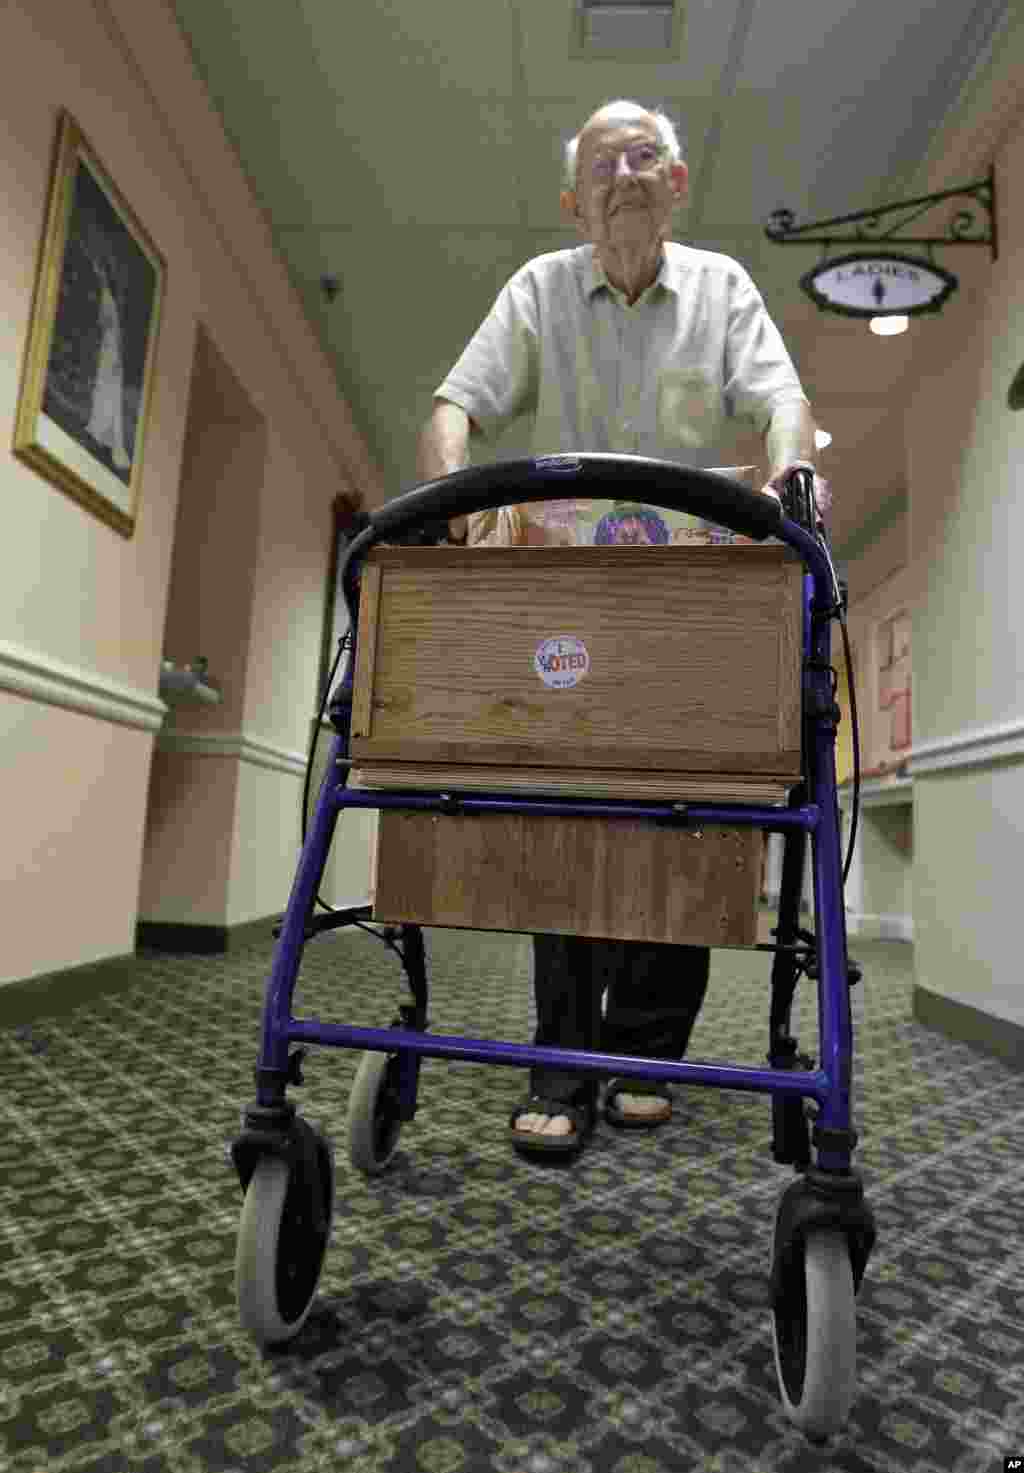 87-year old voter Rolf Kleinwort placed his "I Voted" sticker on the front of his walker as he heads back to his residence at the St. Andrews Estates North retirment community Tuesday, Nov. 6, 2012, in Boca Raton, Fla. (AP Photo/Chris O'Meara)